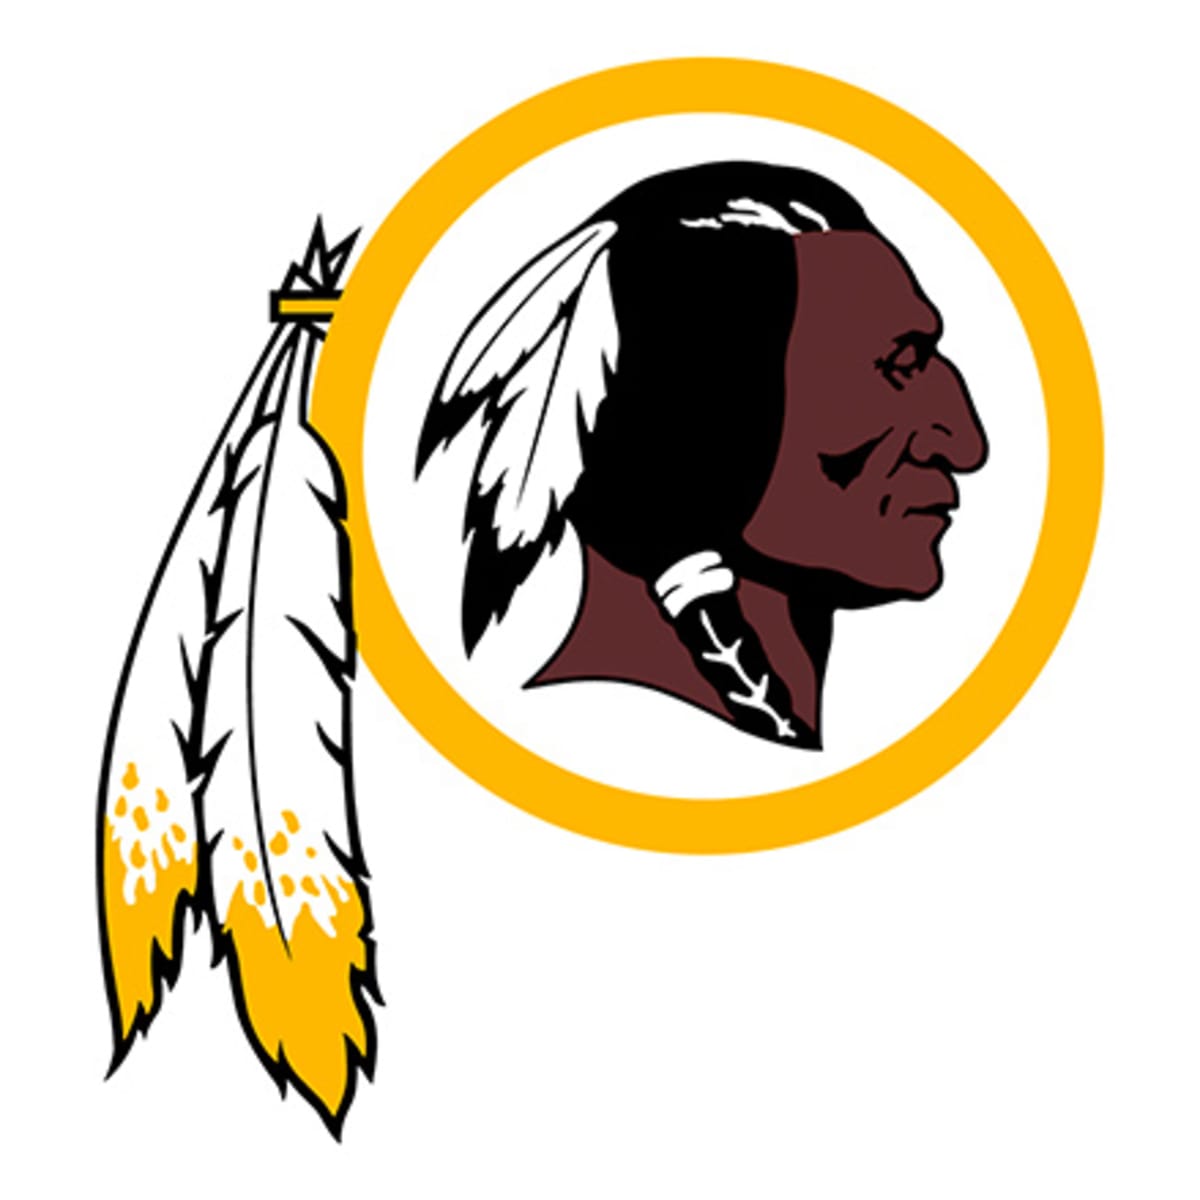 Washington Redskins: 10 Facts About the Team's Name 